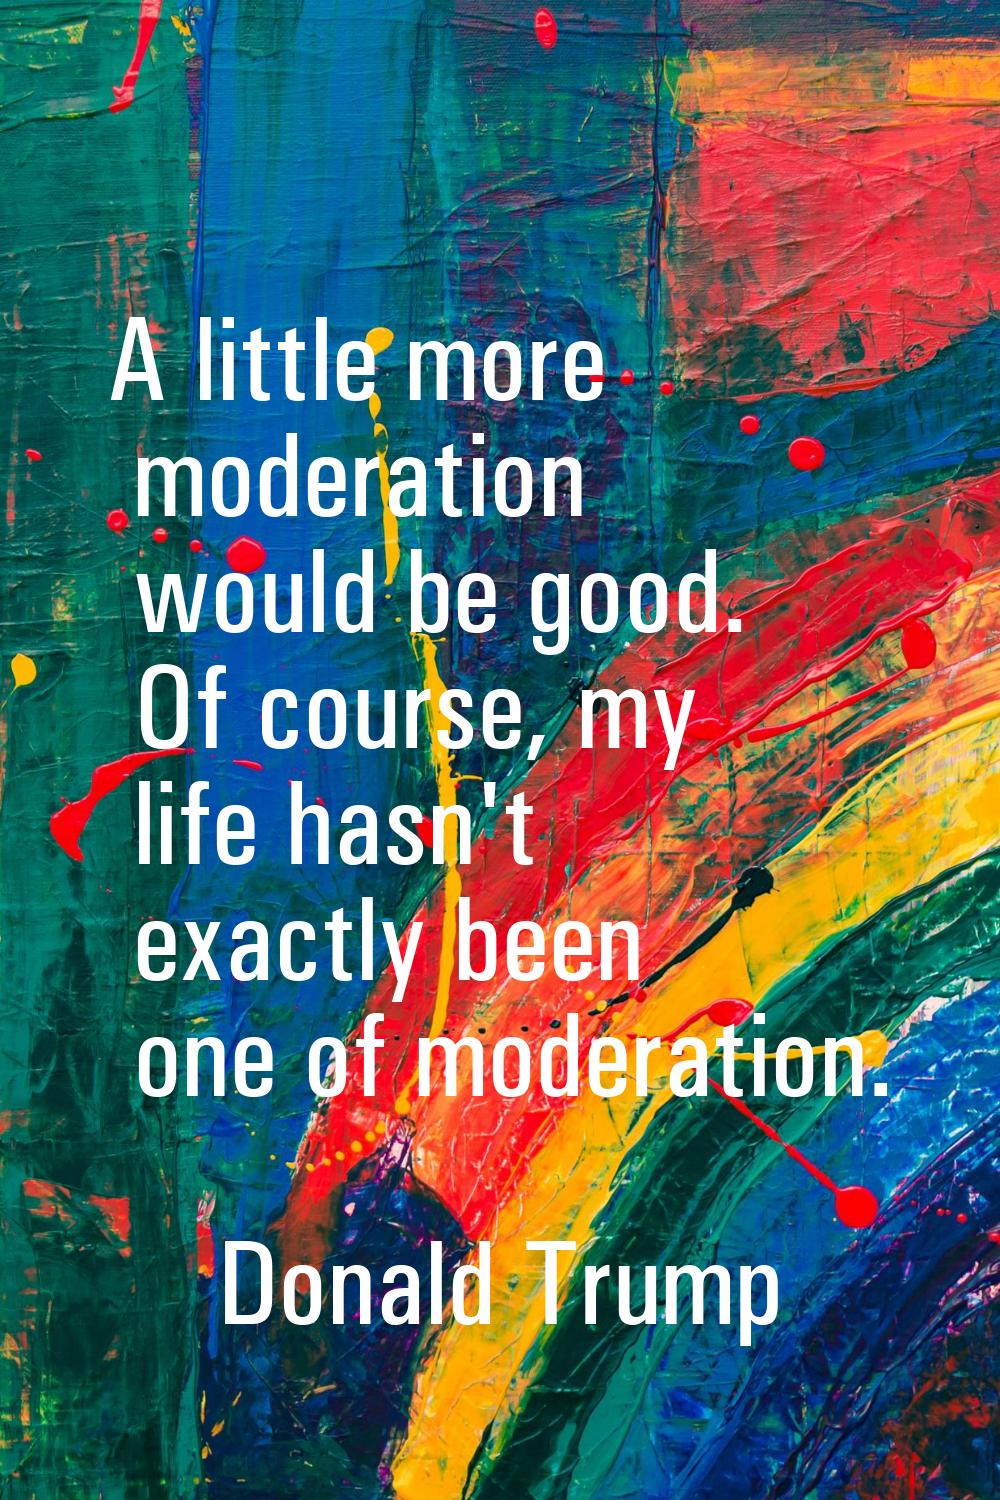 A little more moderation would be good. Of course, my life hasn't exactly been one of moderation.